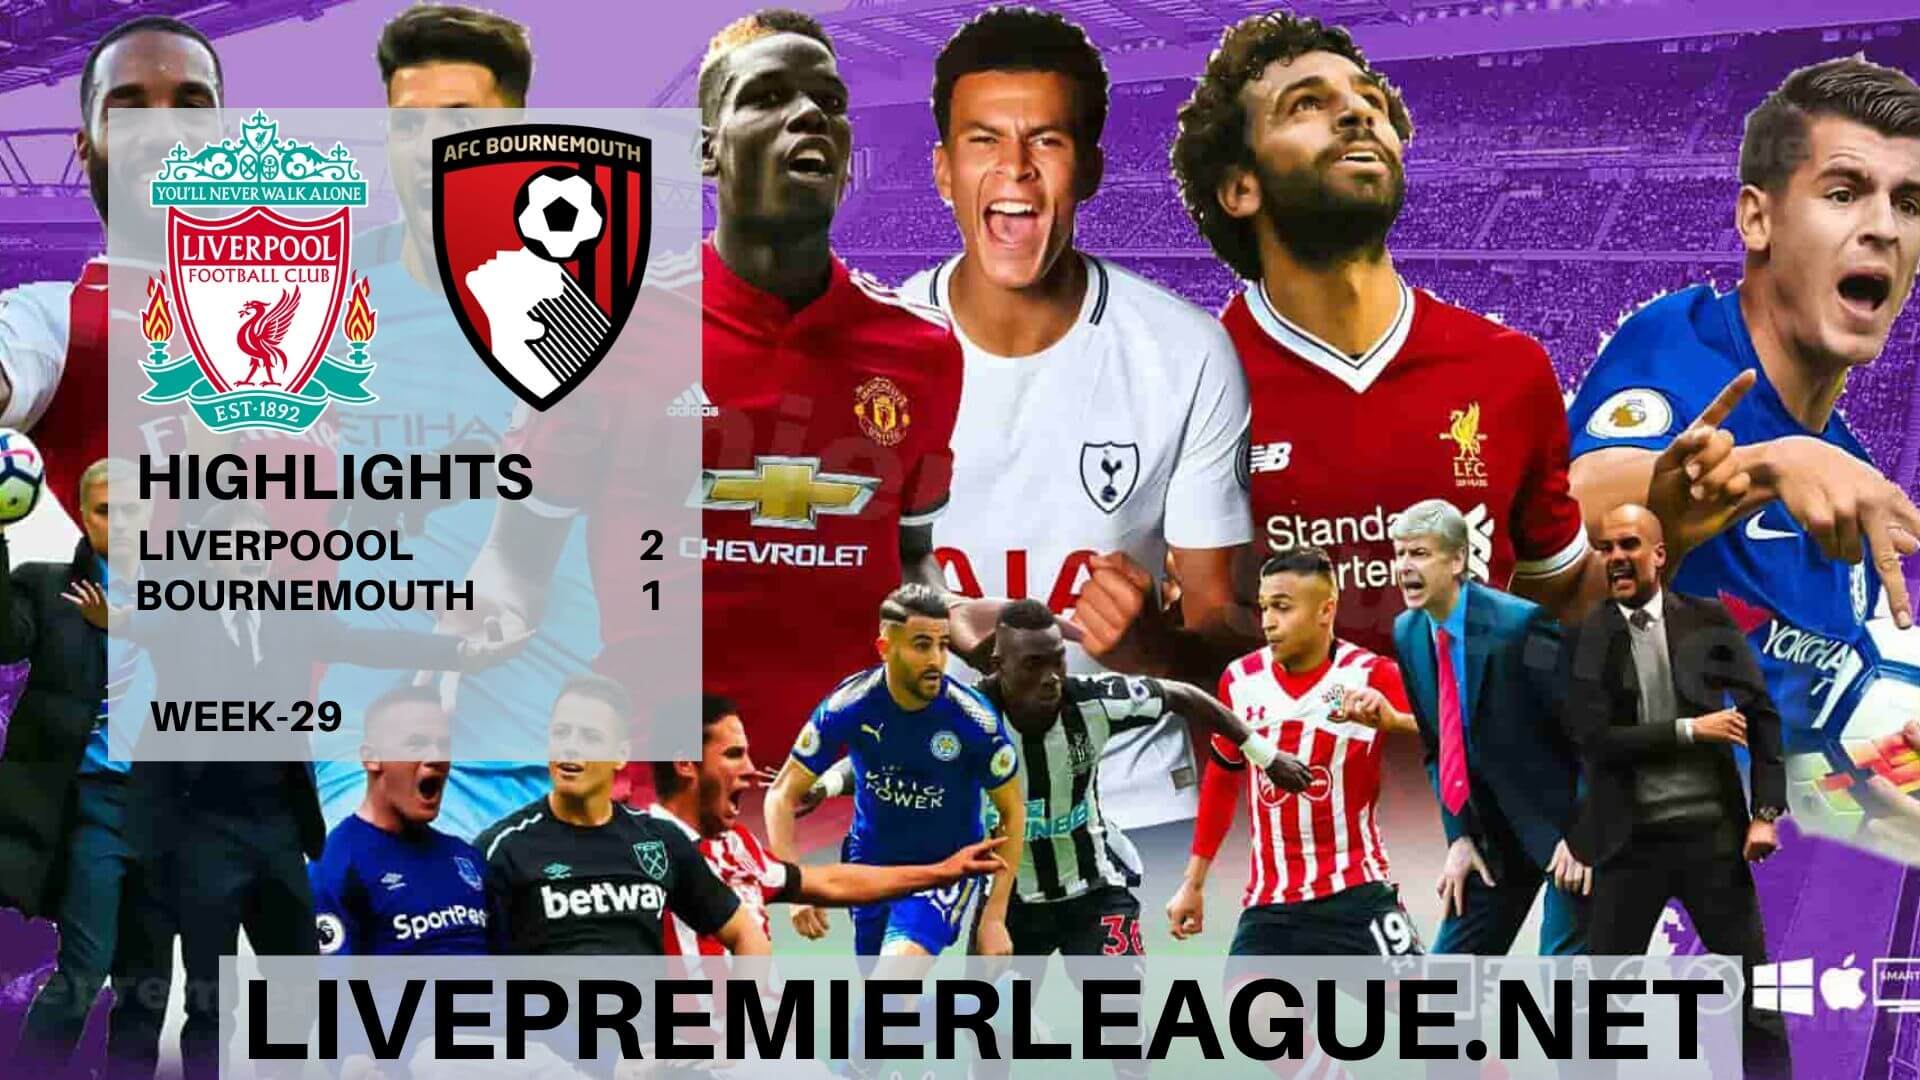 Liverpool Vs AFC Bournemouth Highlights 2020 Week 29